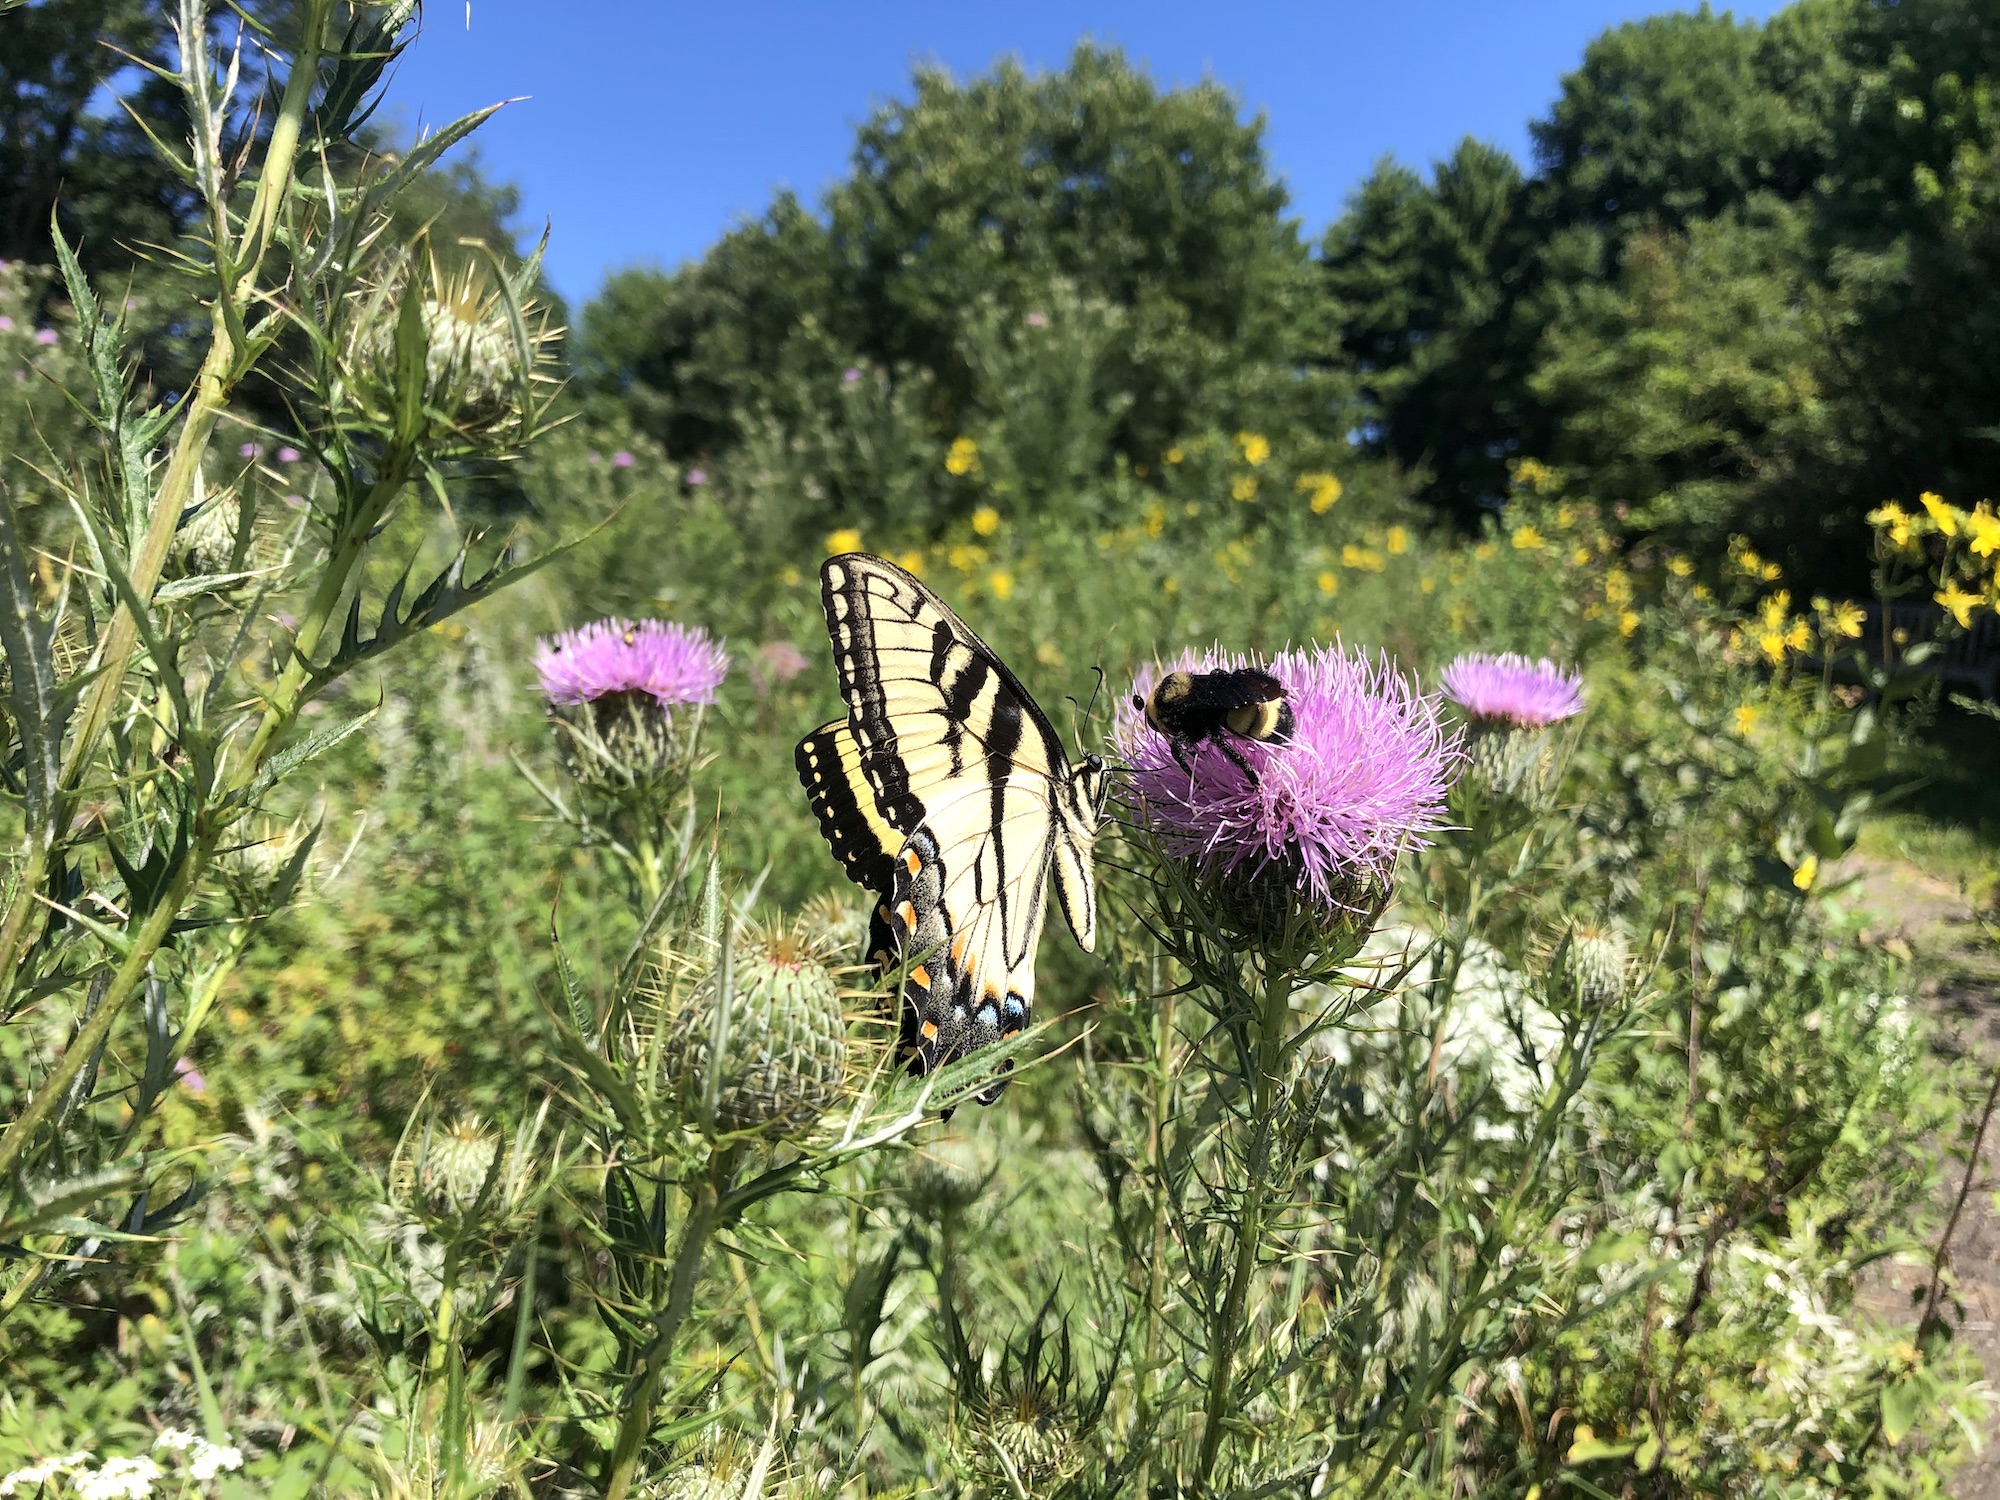 Male Eastern Tiger Swallowtail butterfly on Field Thistle in UW Arboretum Curtis Prairie in Madison, Wisconsin on August 16, 2020.